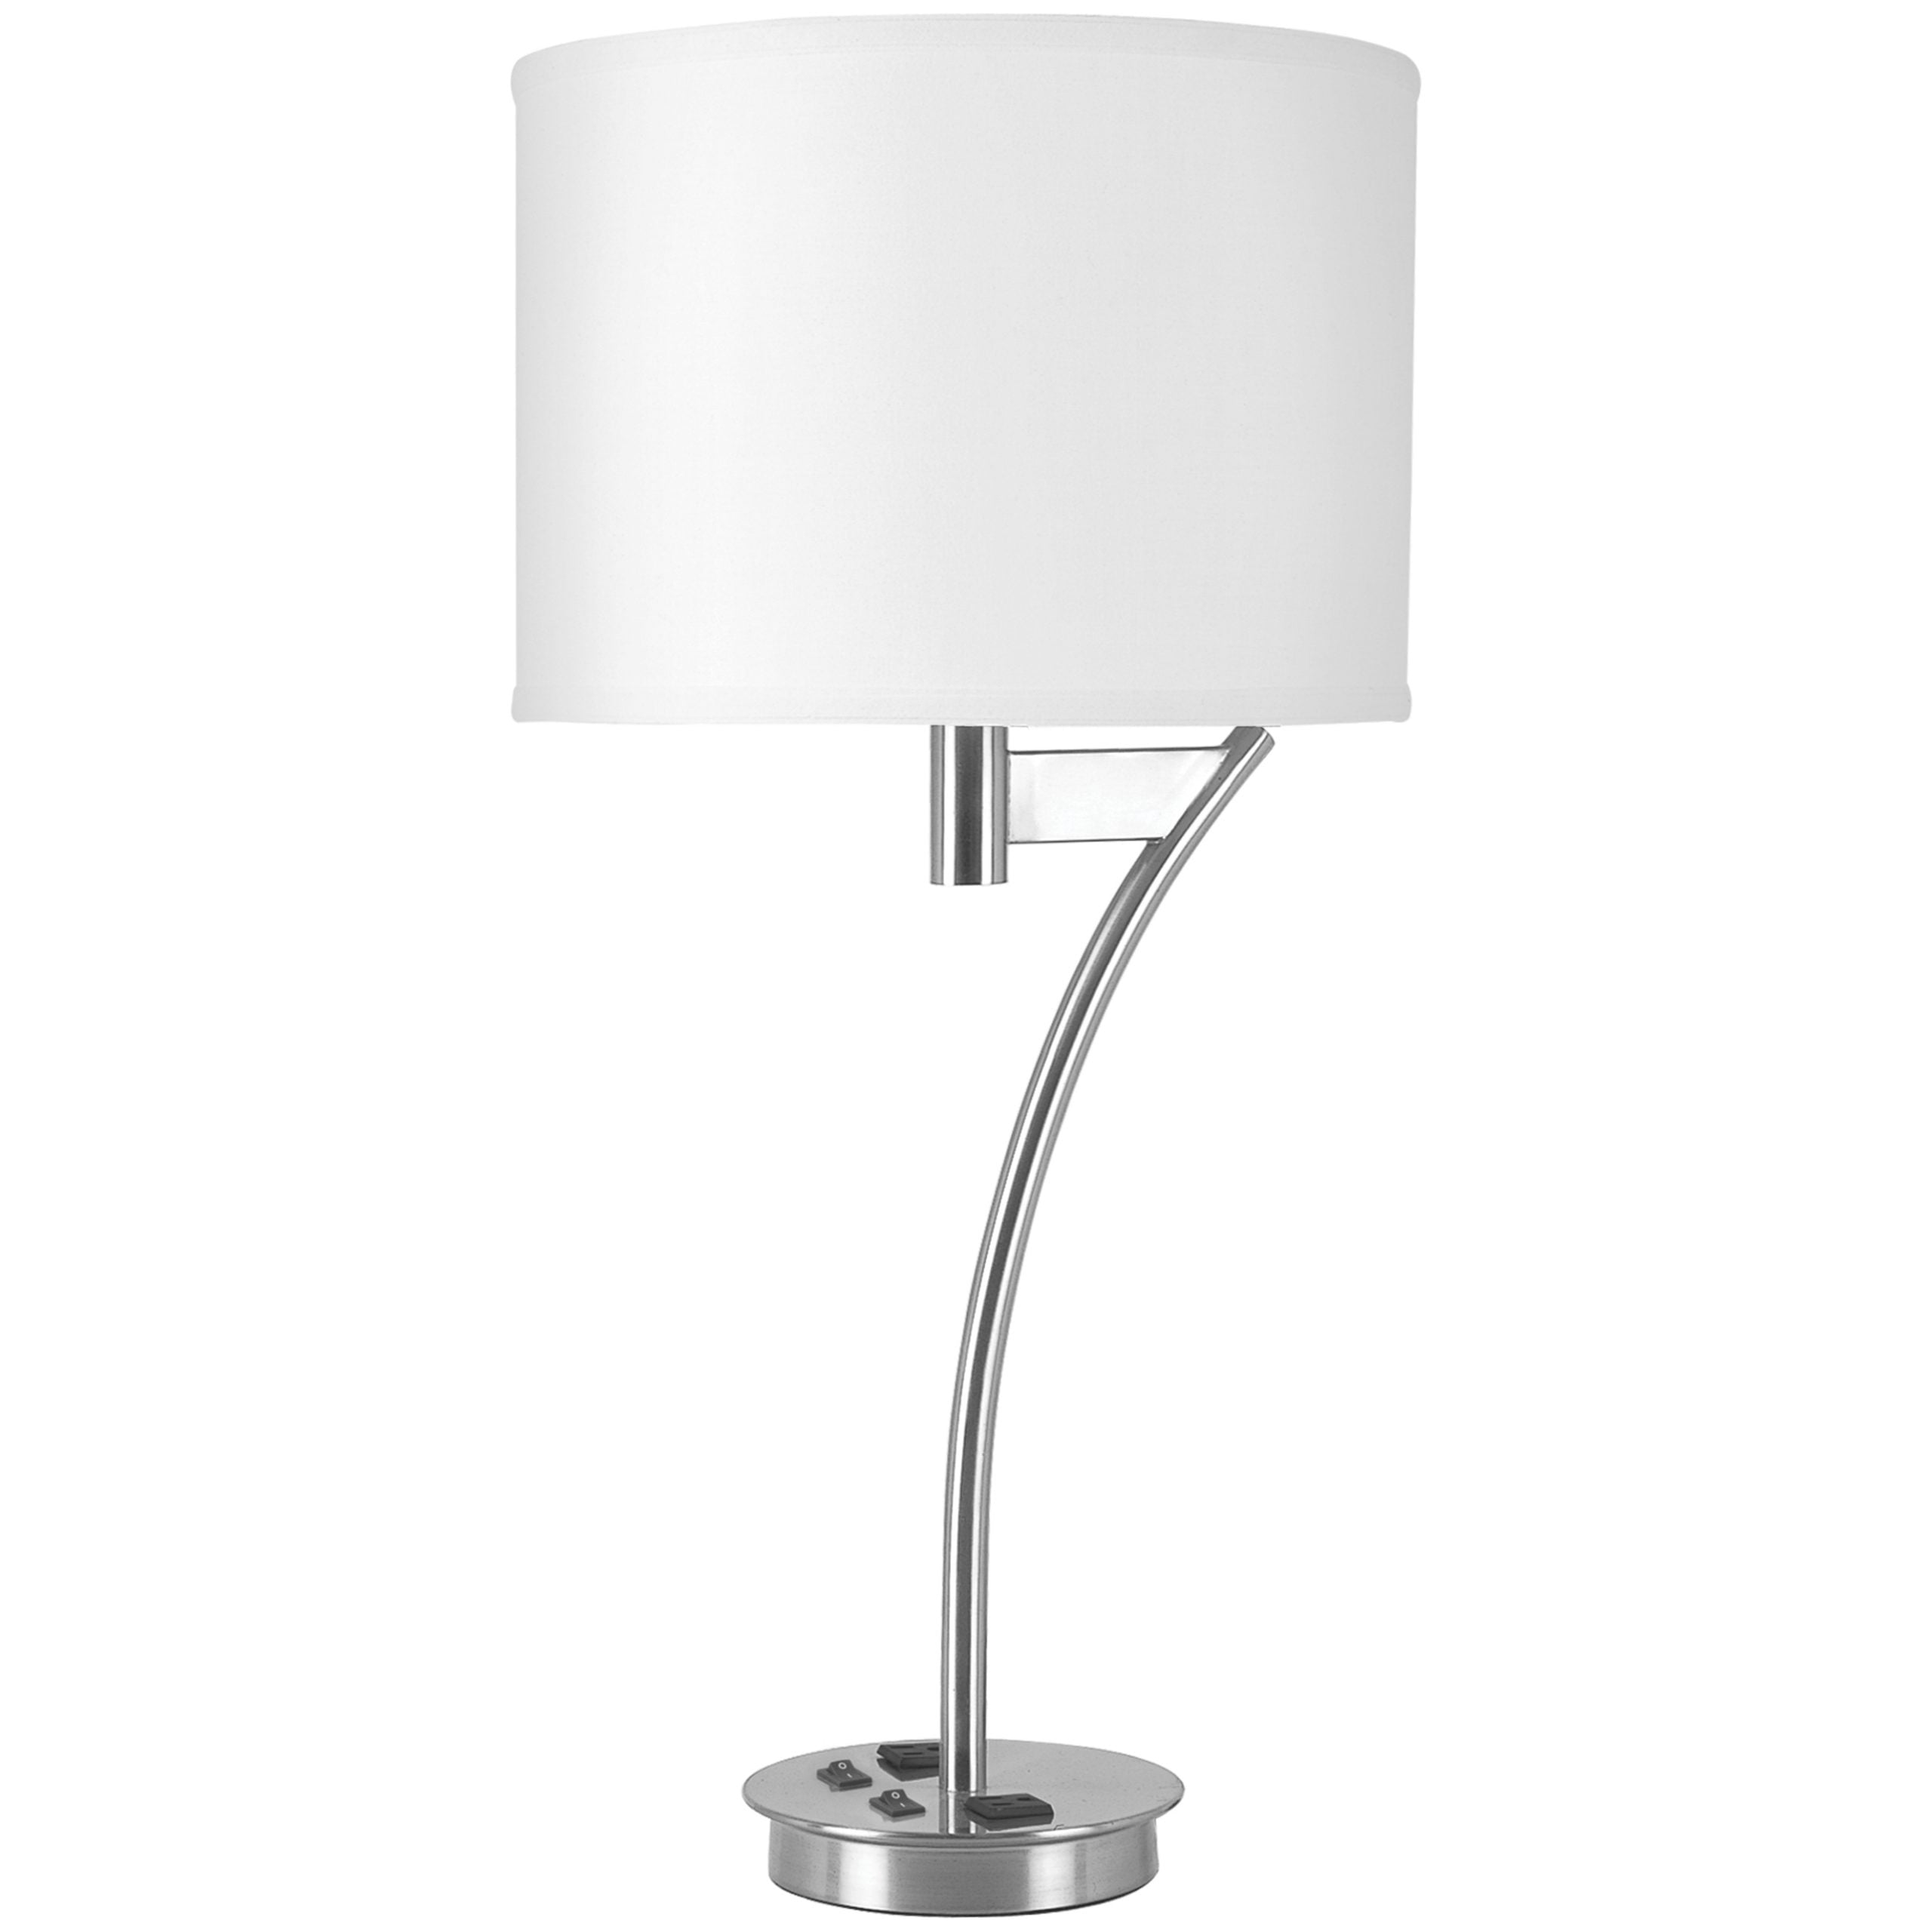 Corbel Twin Table Lamp with 2 Outlets